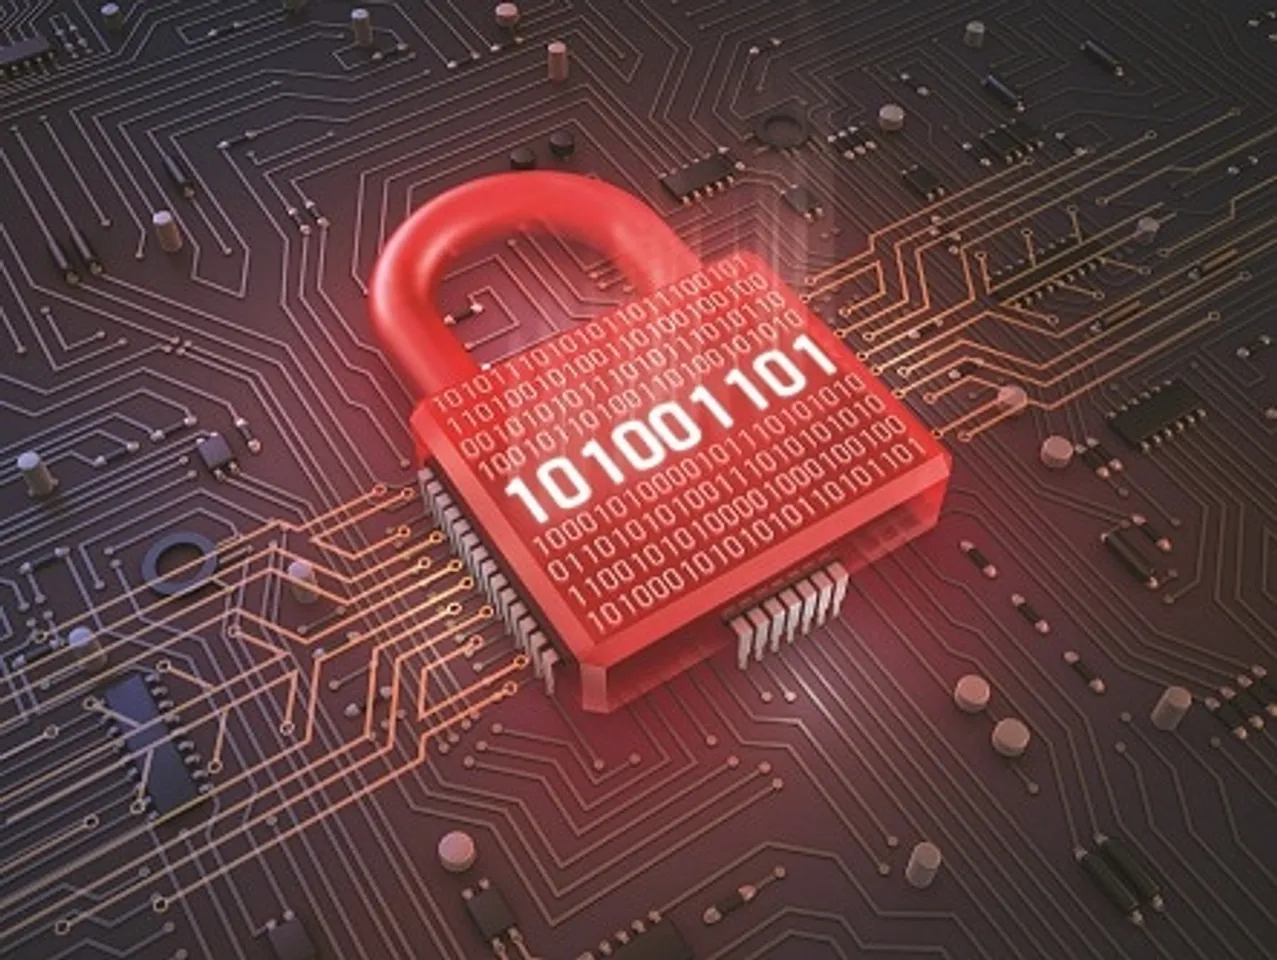 Security considerations for software procurement by the government